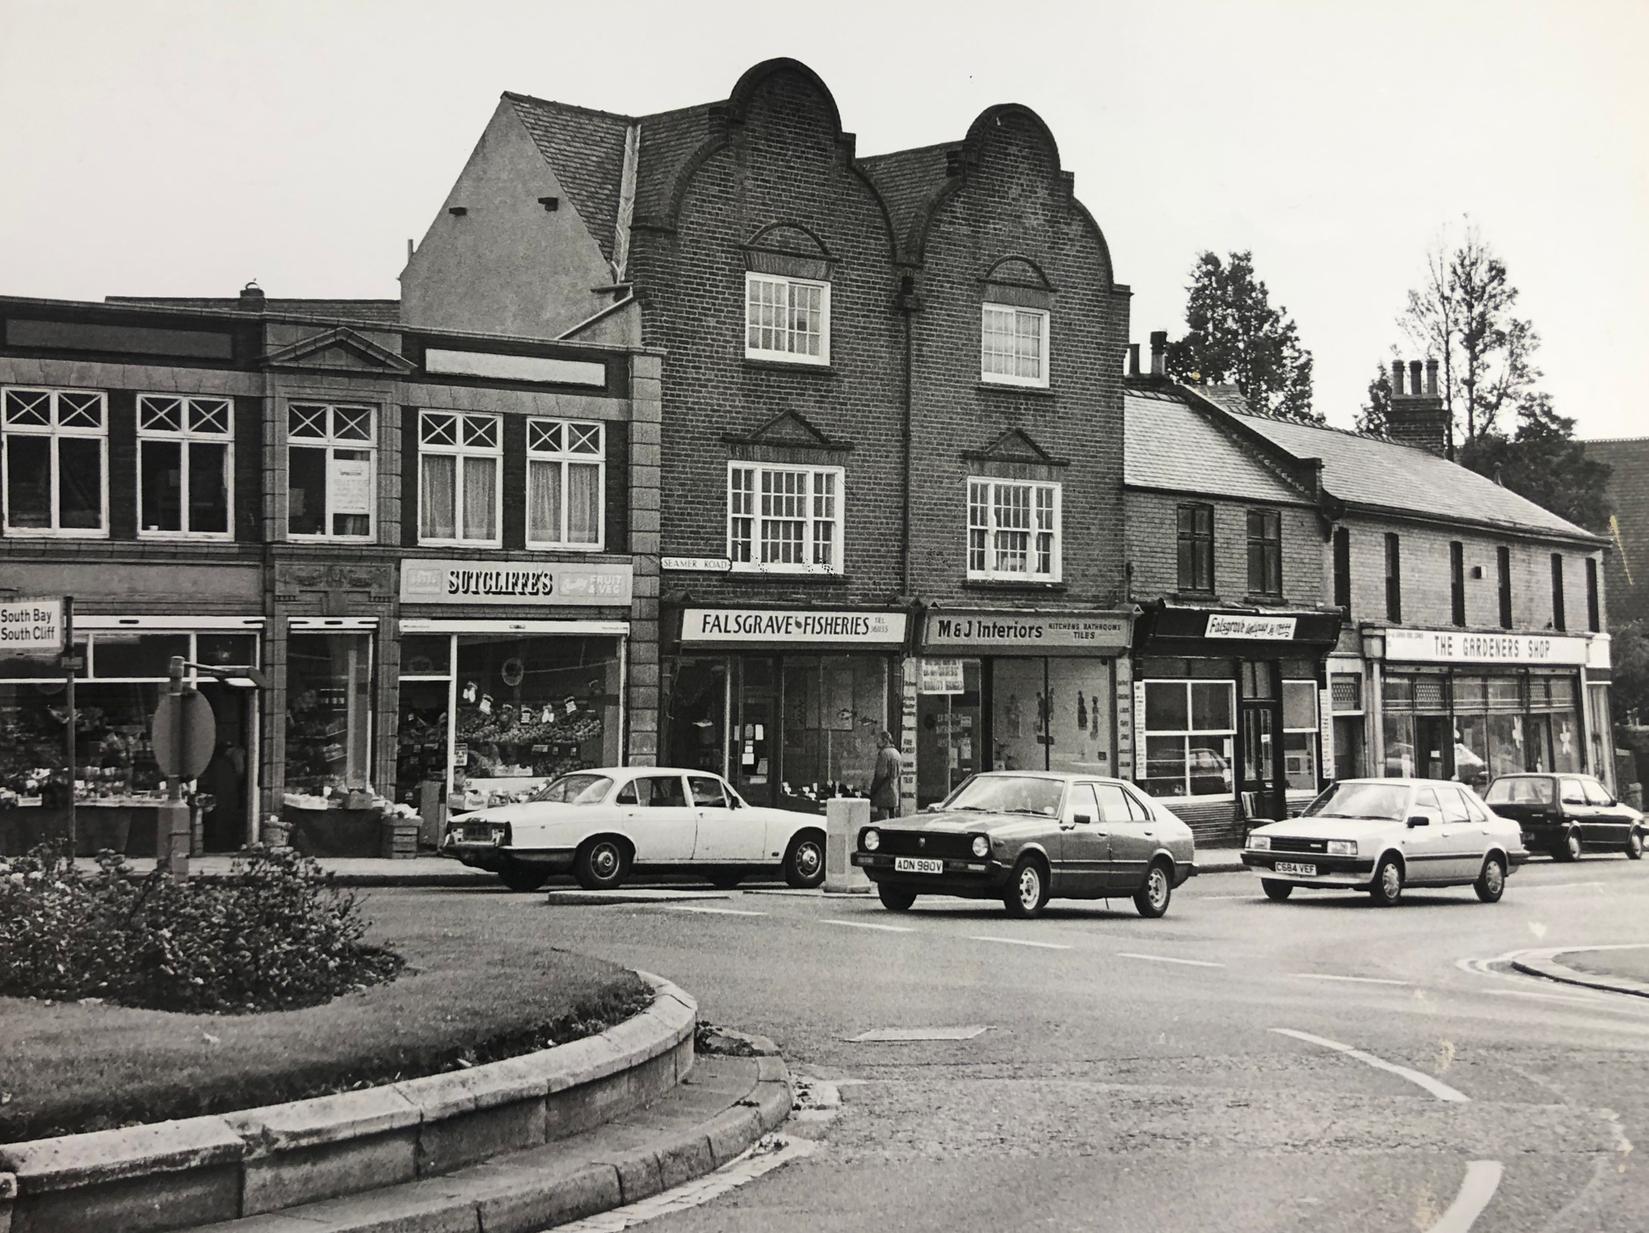 This part of town looks very different now - the roundabout is no more for a start. But also, the large buildings in the centre have been turned into flats, whilst the gardeners shop on the corner was most recently Cartridge World.